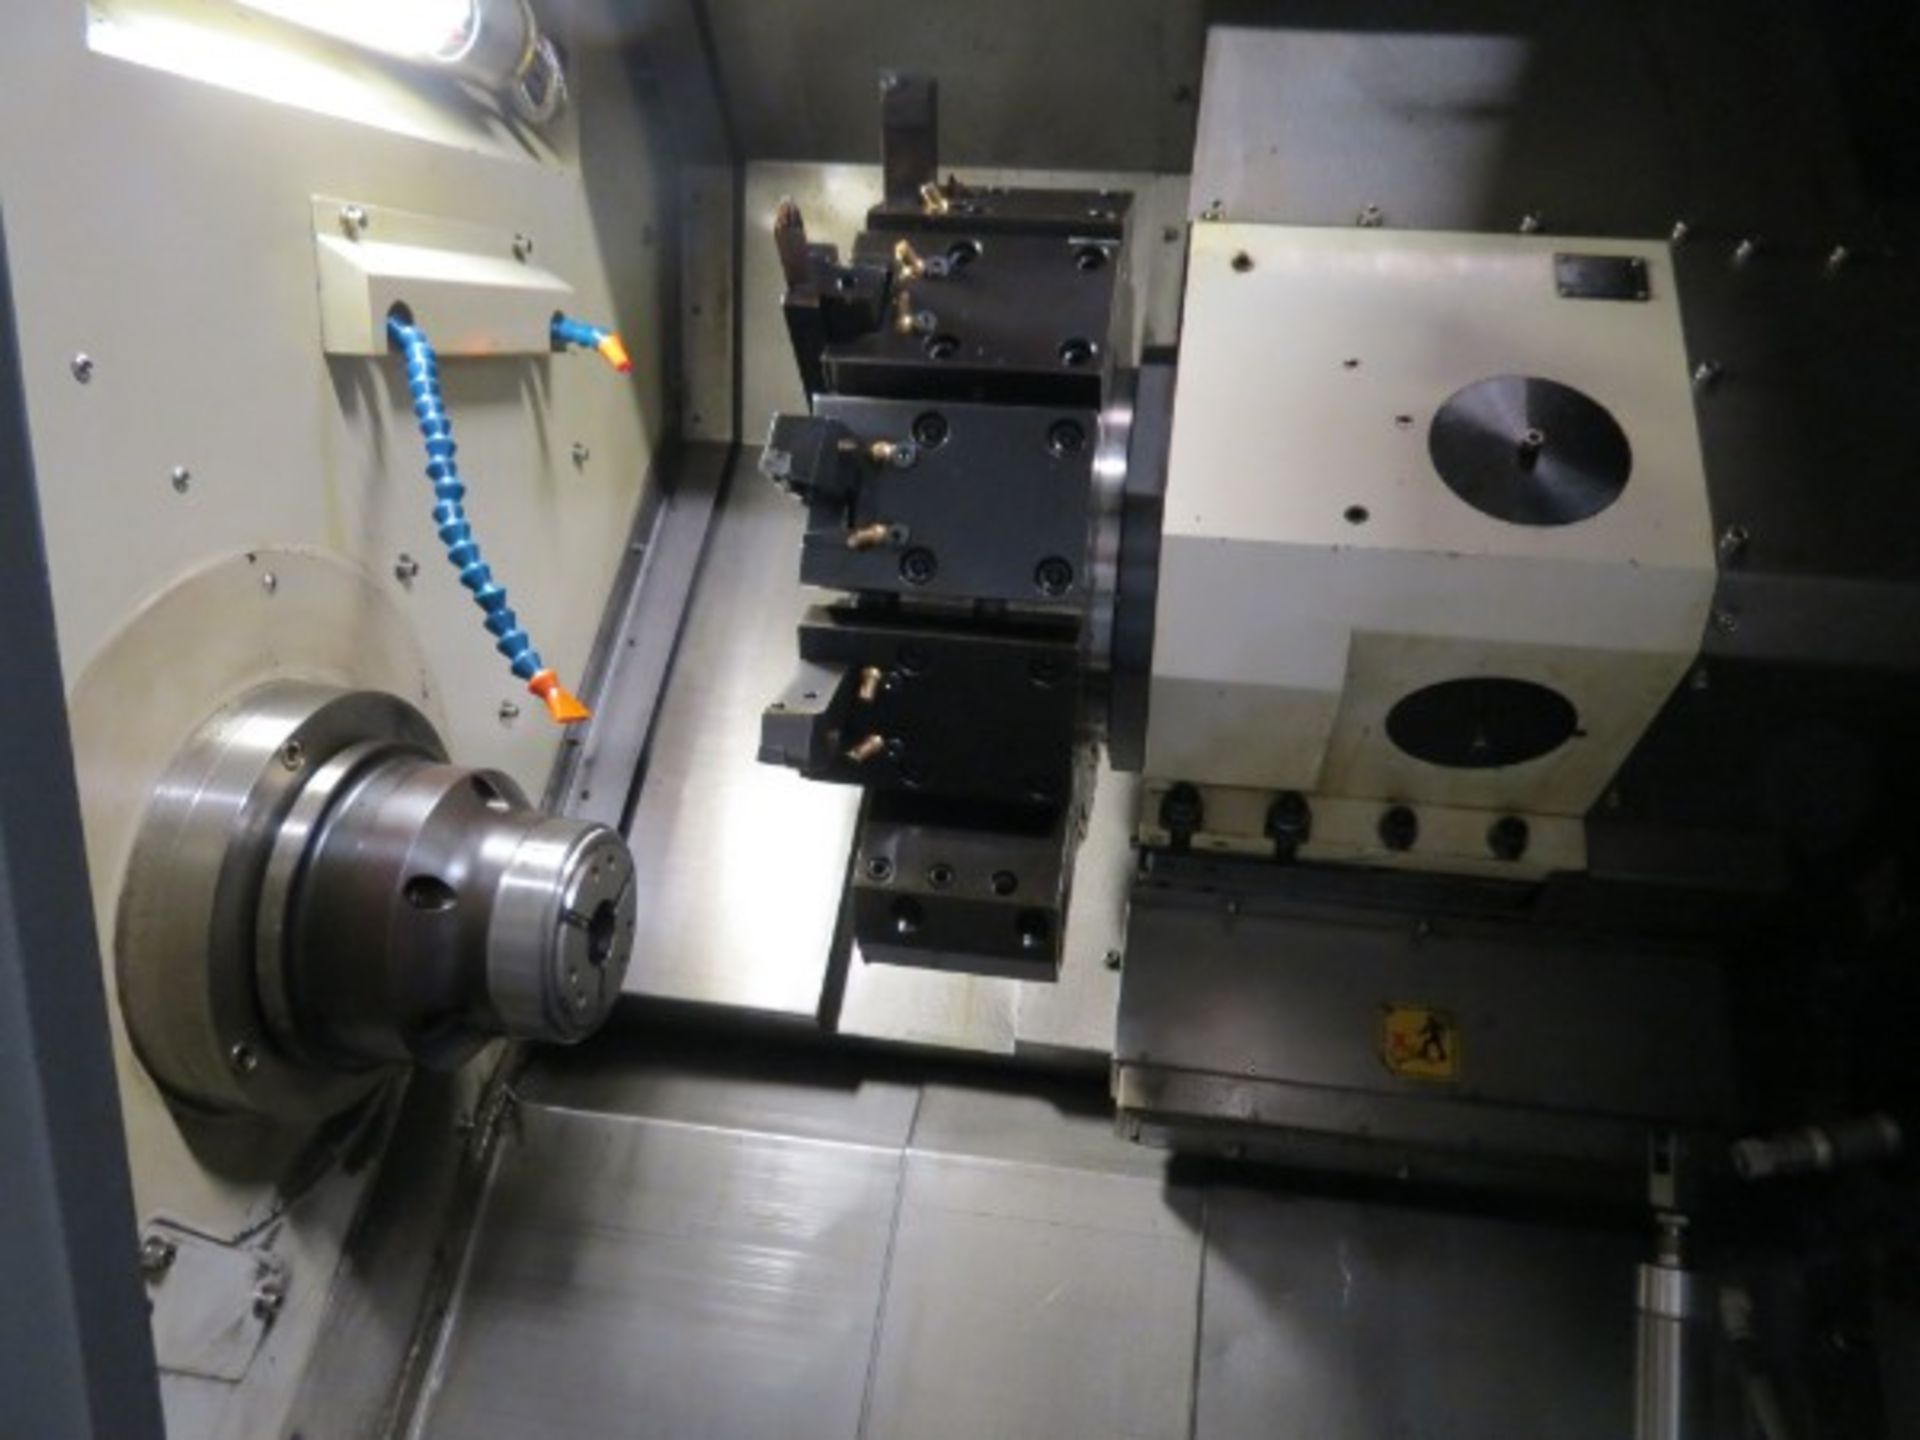 Leadwell T-7 CNC Turning Center Fanuc 0i-TD, 20 HP, 4500 RPM, 8" Chuck, X-Axis 7.9", Y-Axis 23.6", - Image 5 of 7